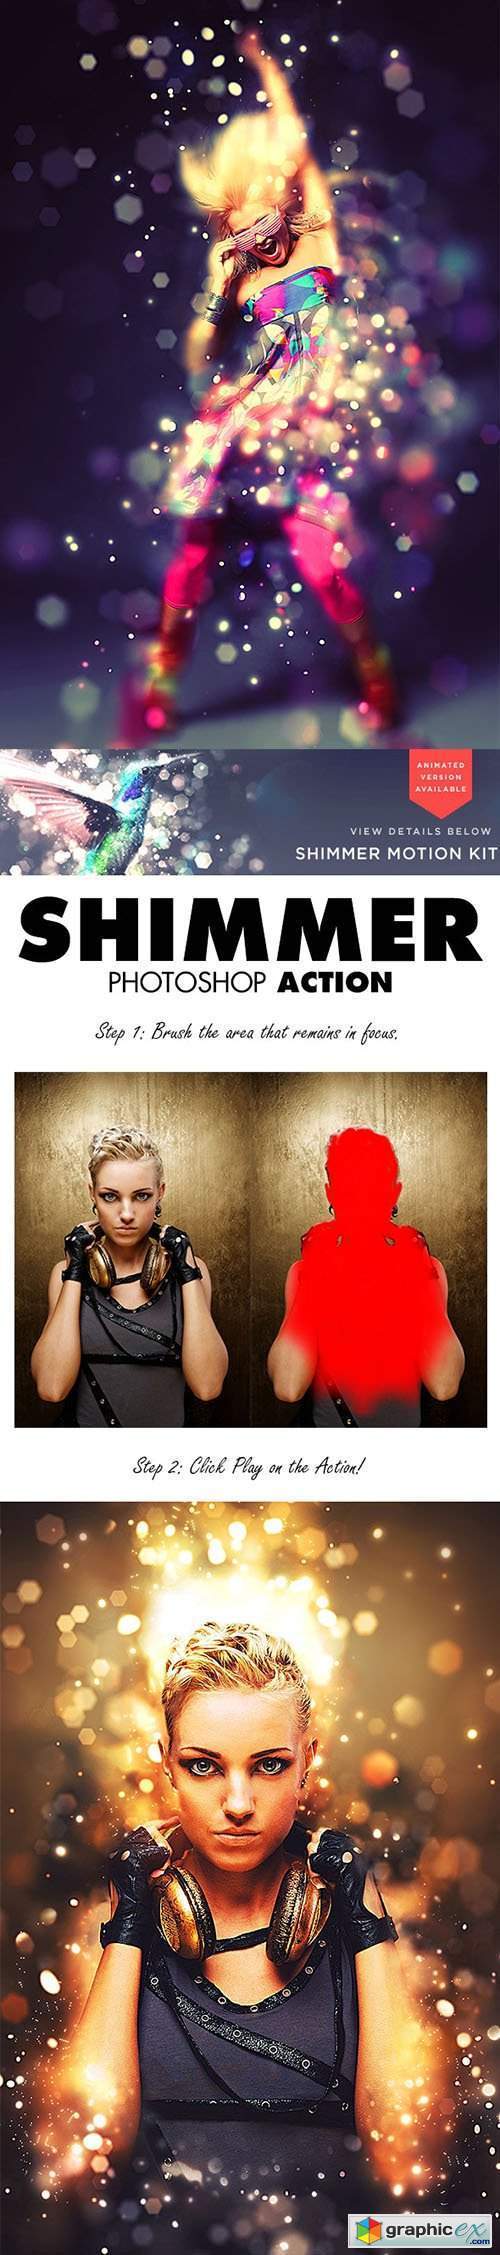 Shimmer Photoshop Action 9277291 - Animated Version Available